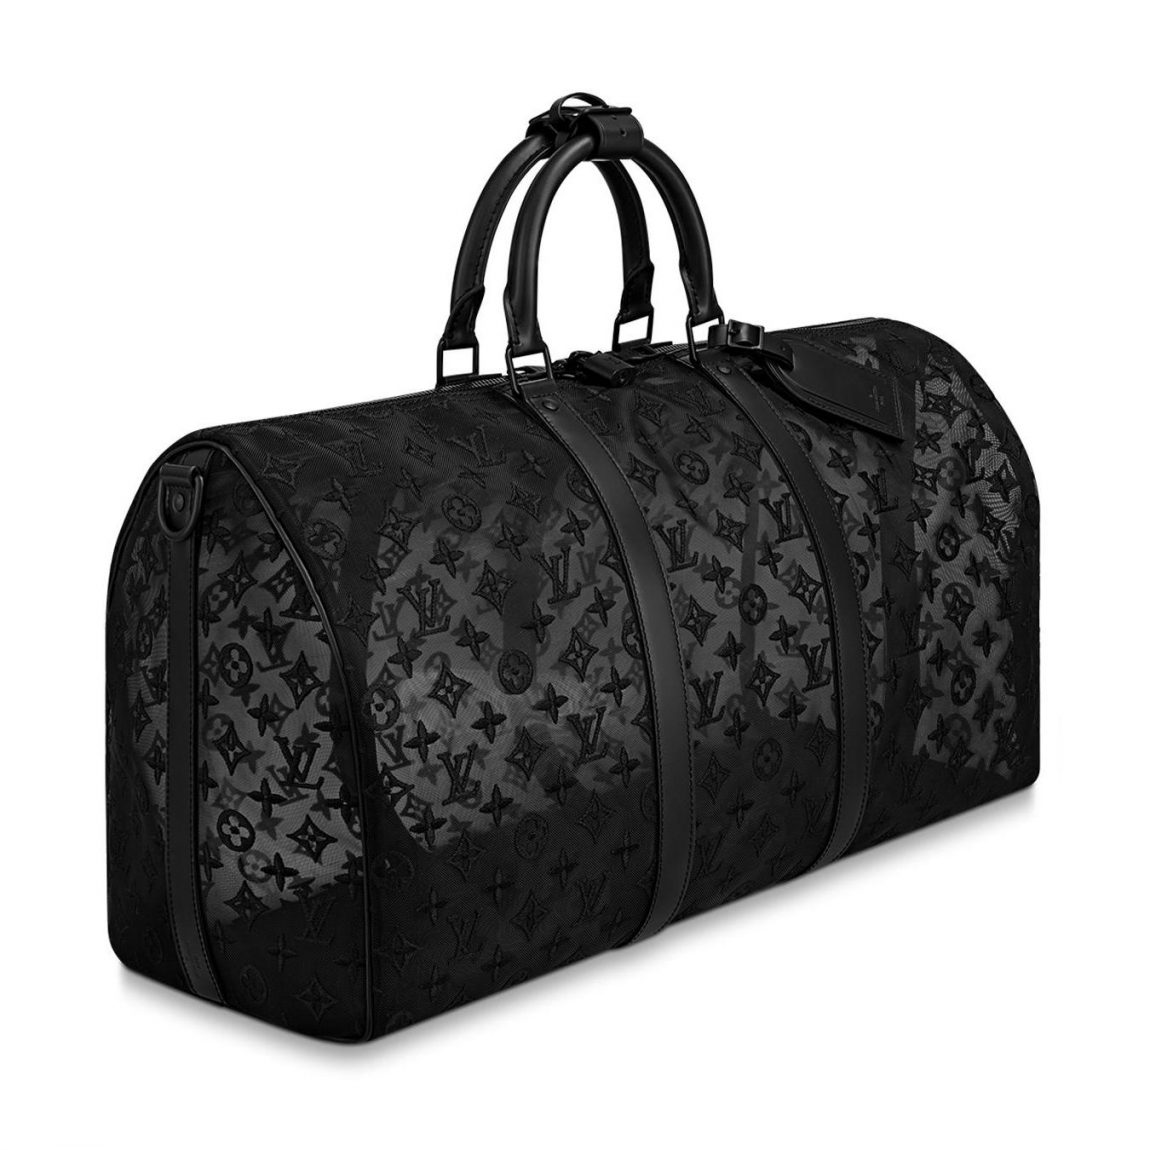 Louis Vuitton Monogram See Through Keepall 50 Bag Reference Guide | Spotted Fashion